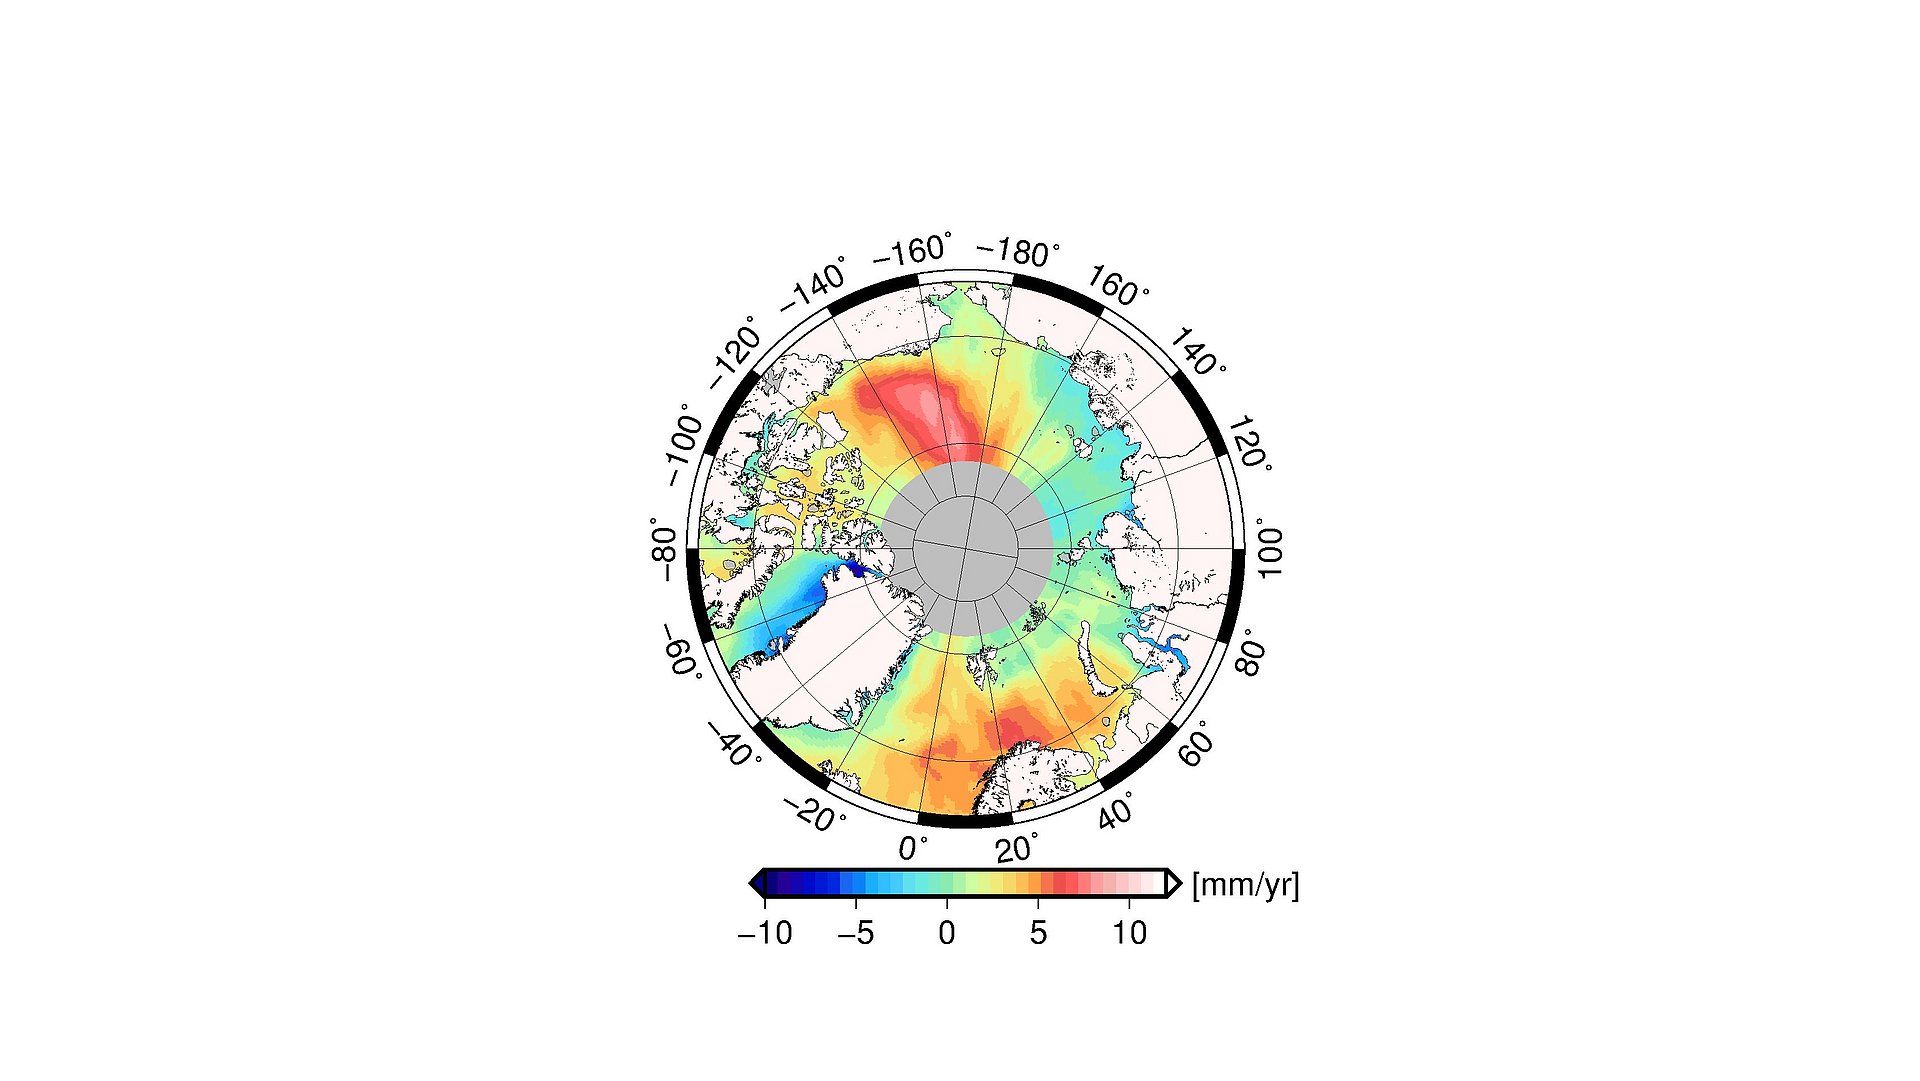 The map illustrates that the average change in the Arctic sea level varies regionally.